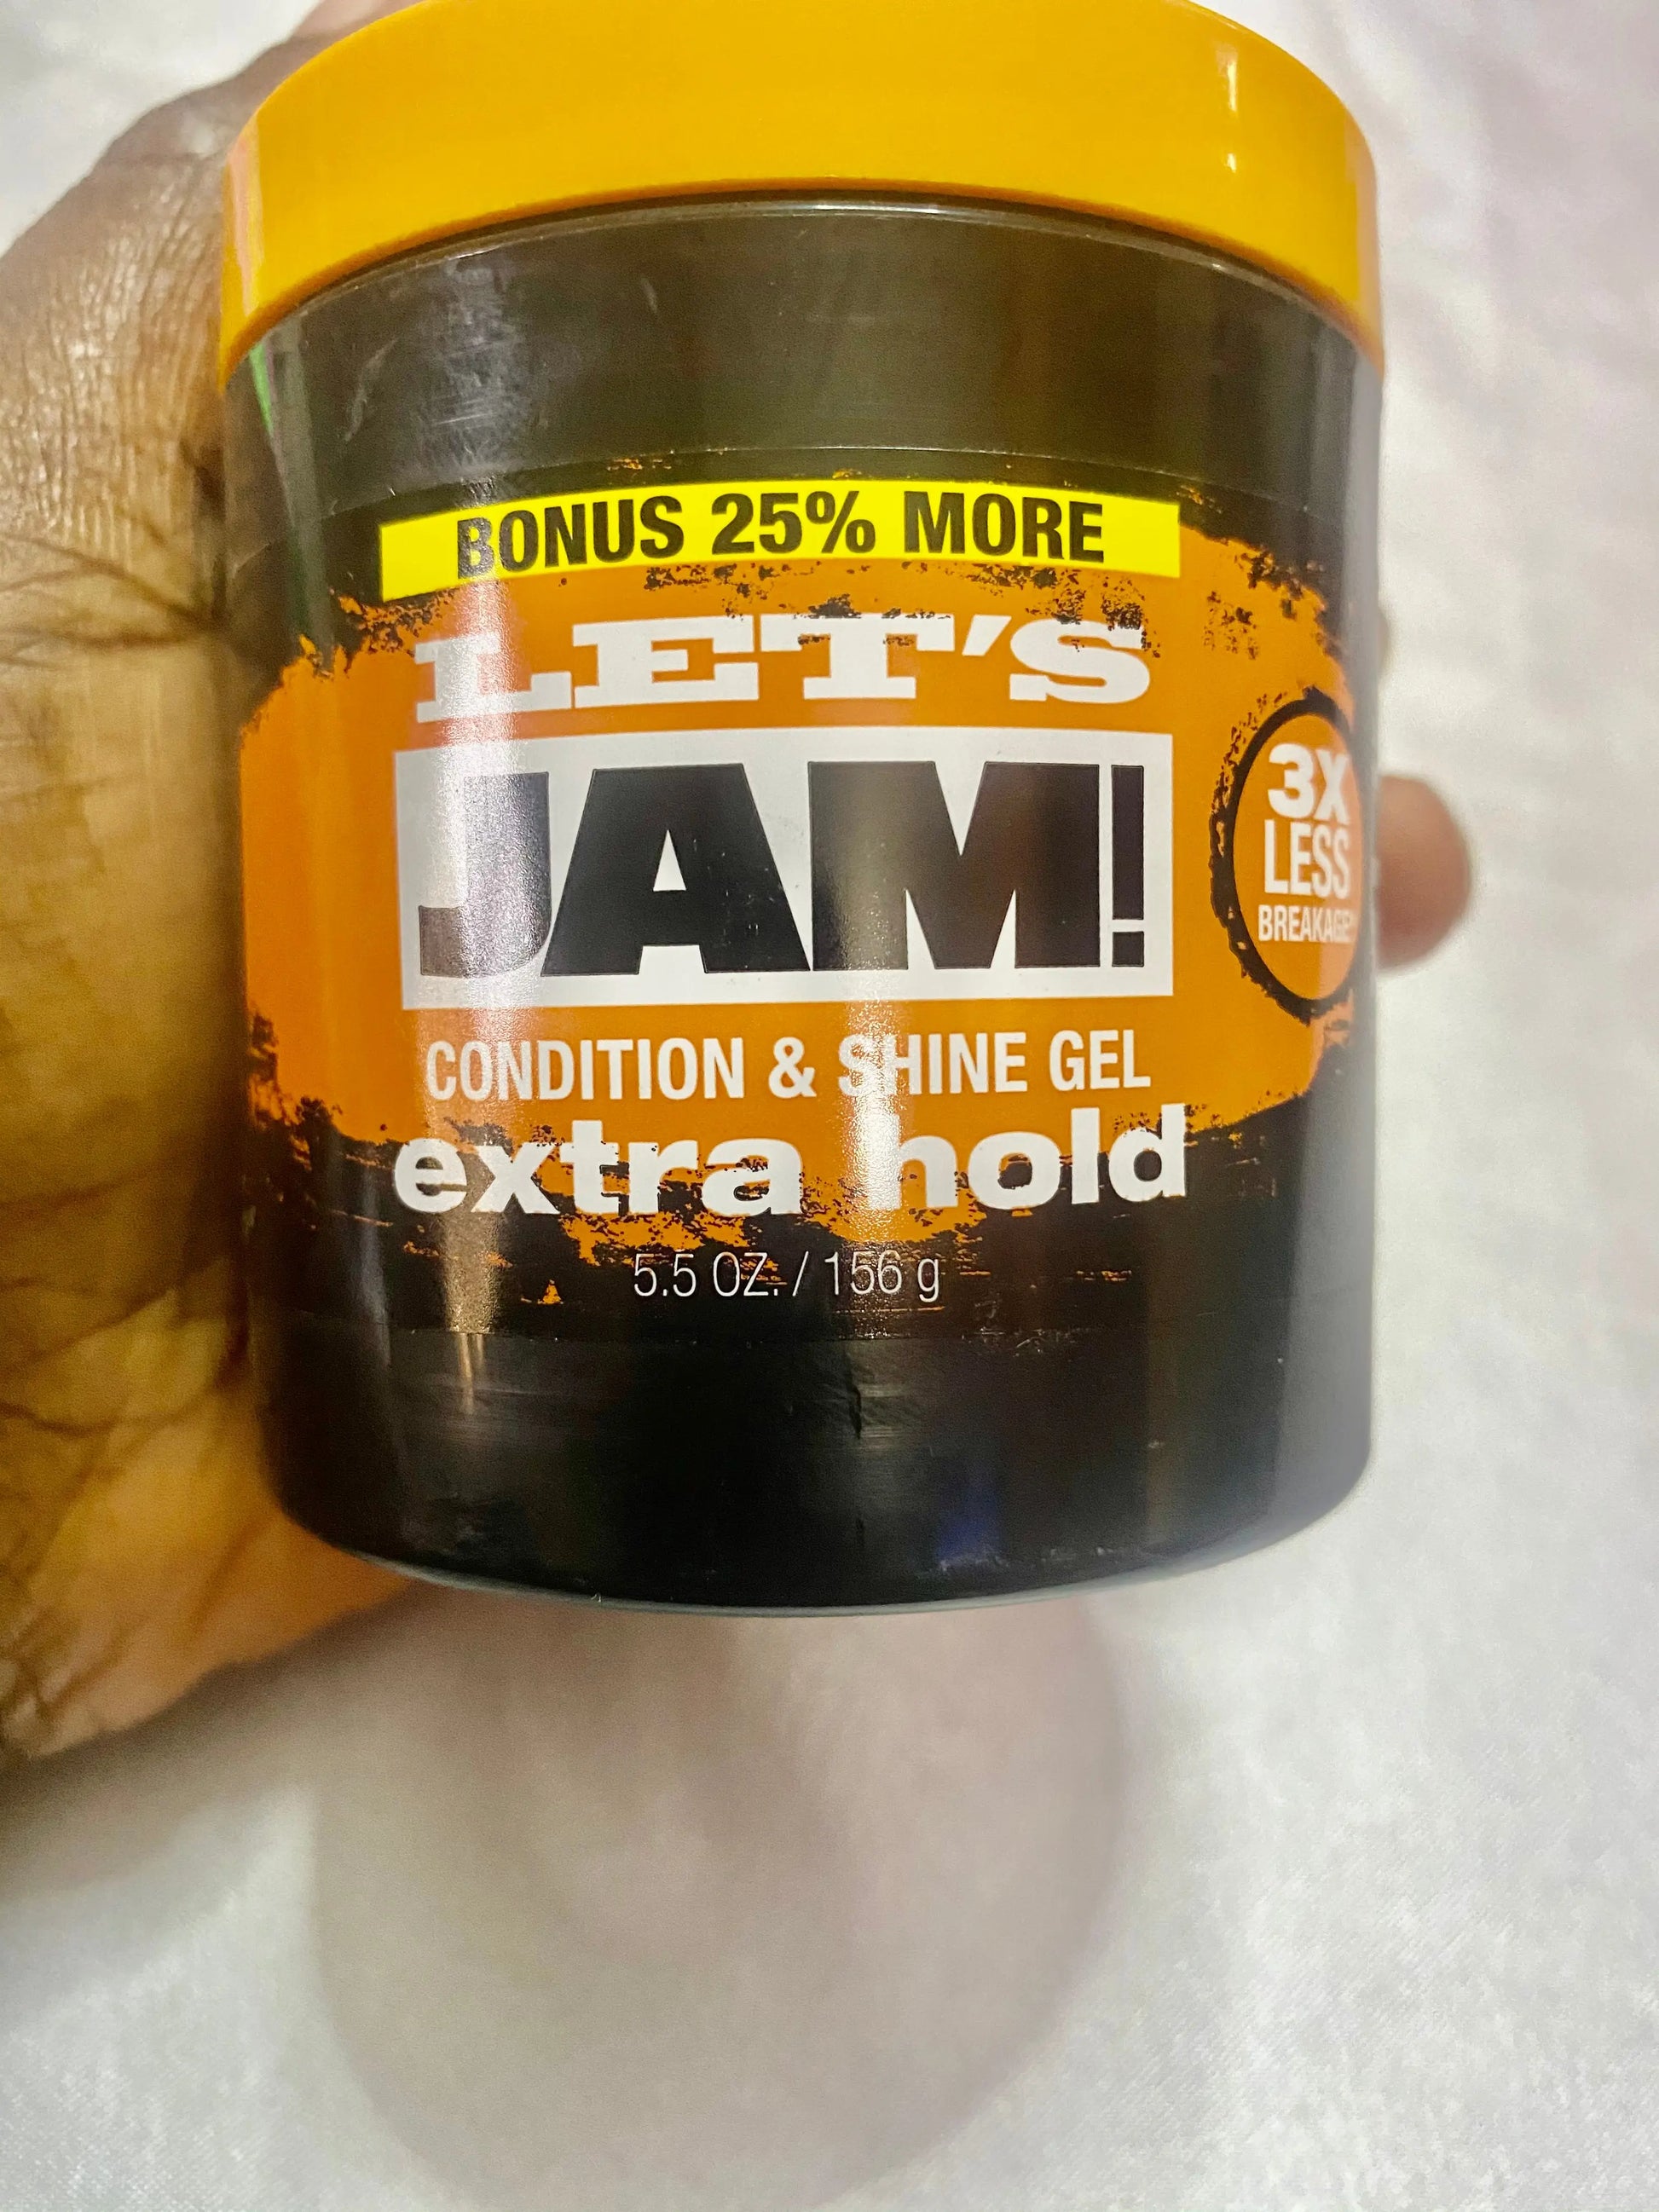 Let’s Jam Extra Hold Hair Gel La Mimz Beauty & Fashion Store